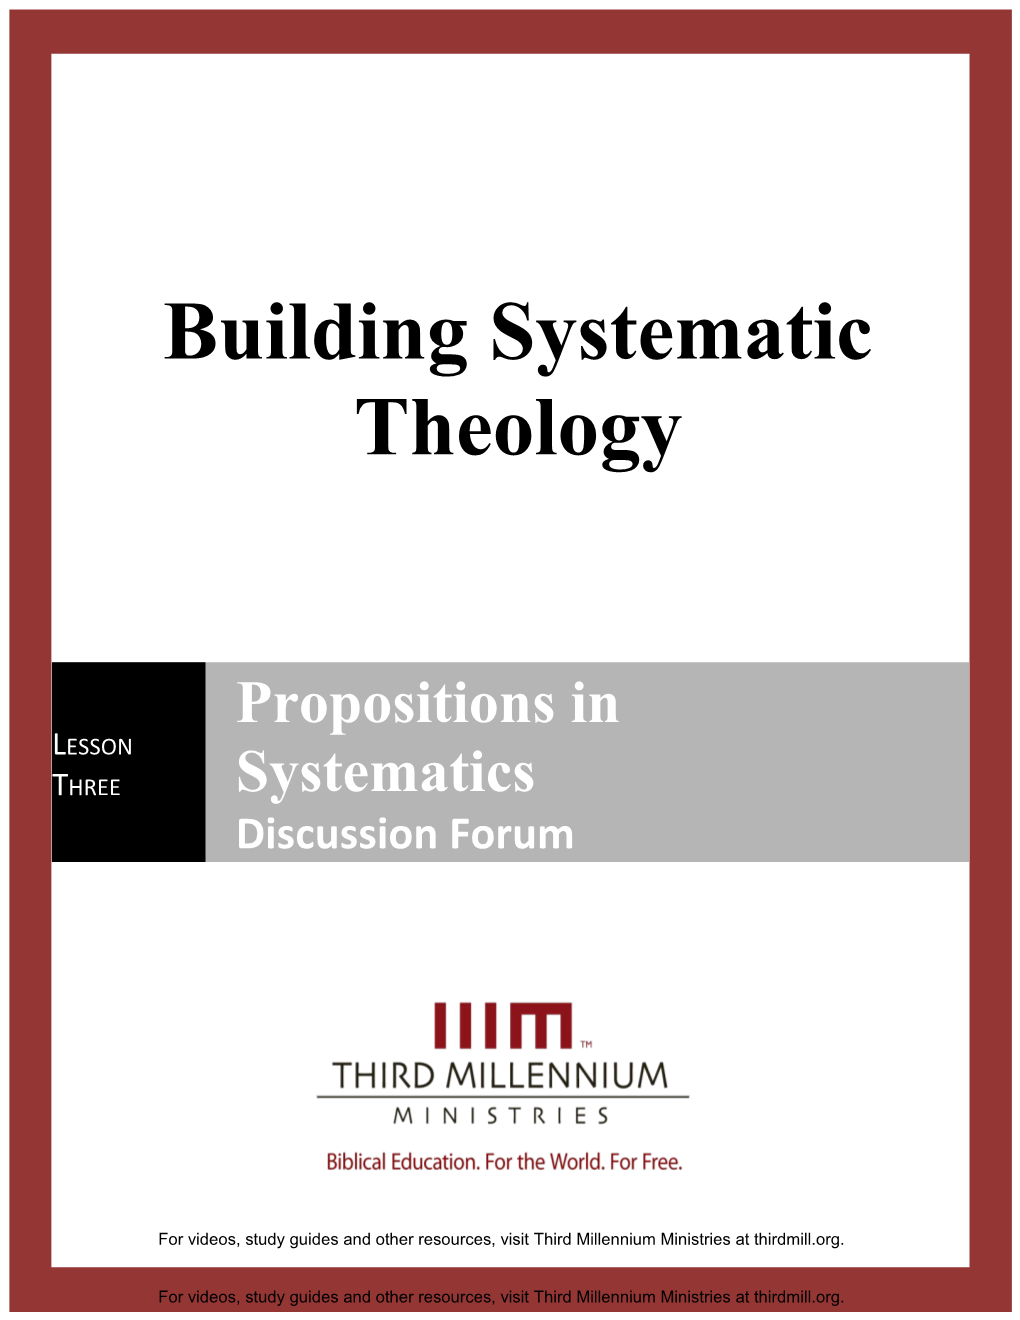 Building Systematic Theology Lesson 3 Discussion Forum